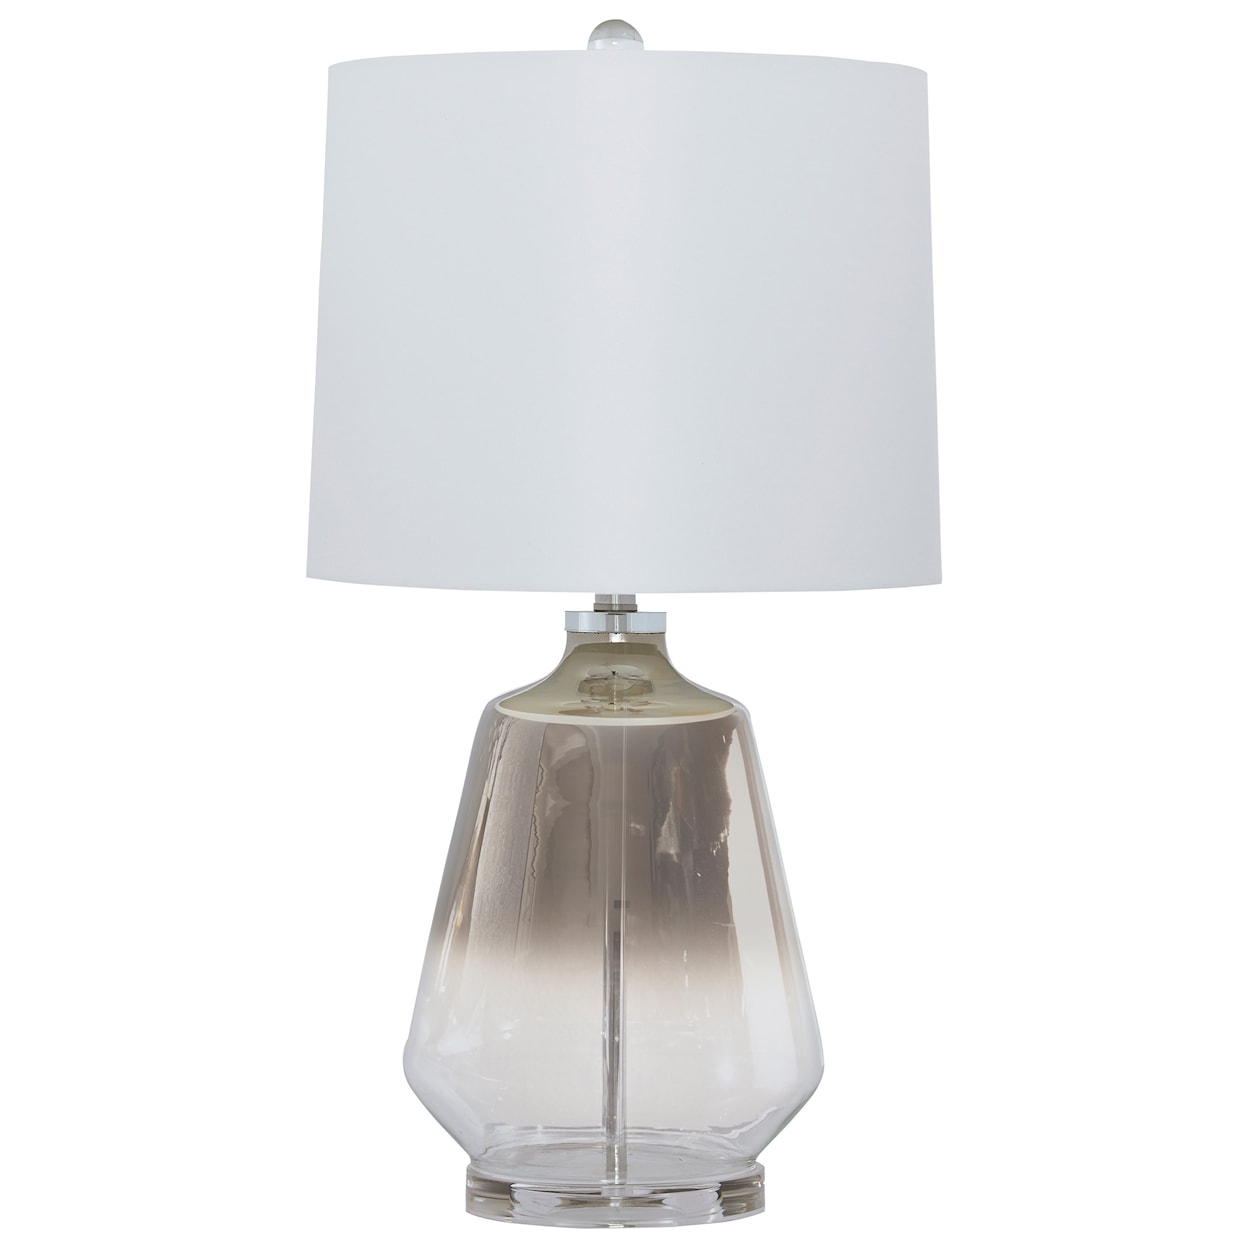 Ashley Furniture Signature Design Lamps - Contemporary Jaslyn Glass Table Lamp